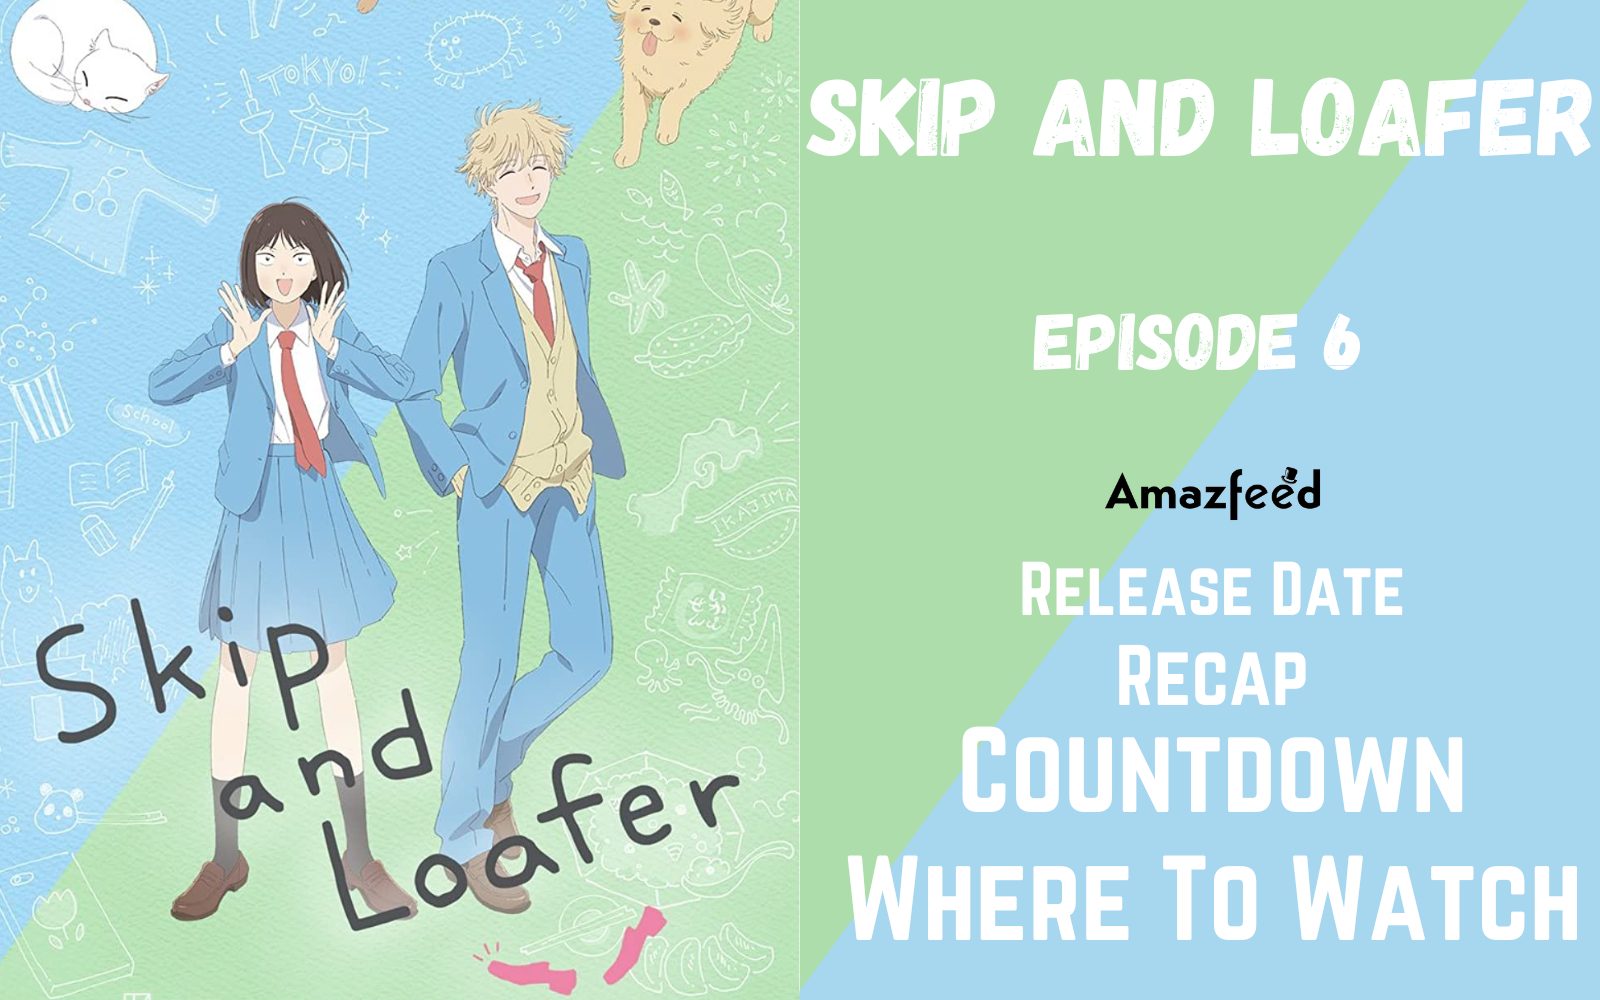 Mitsumi: Skip And Loafer episode 10: Release date, where To watch, what to  expect, countdown, and more